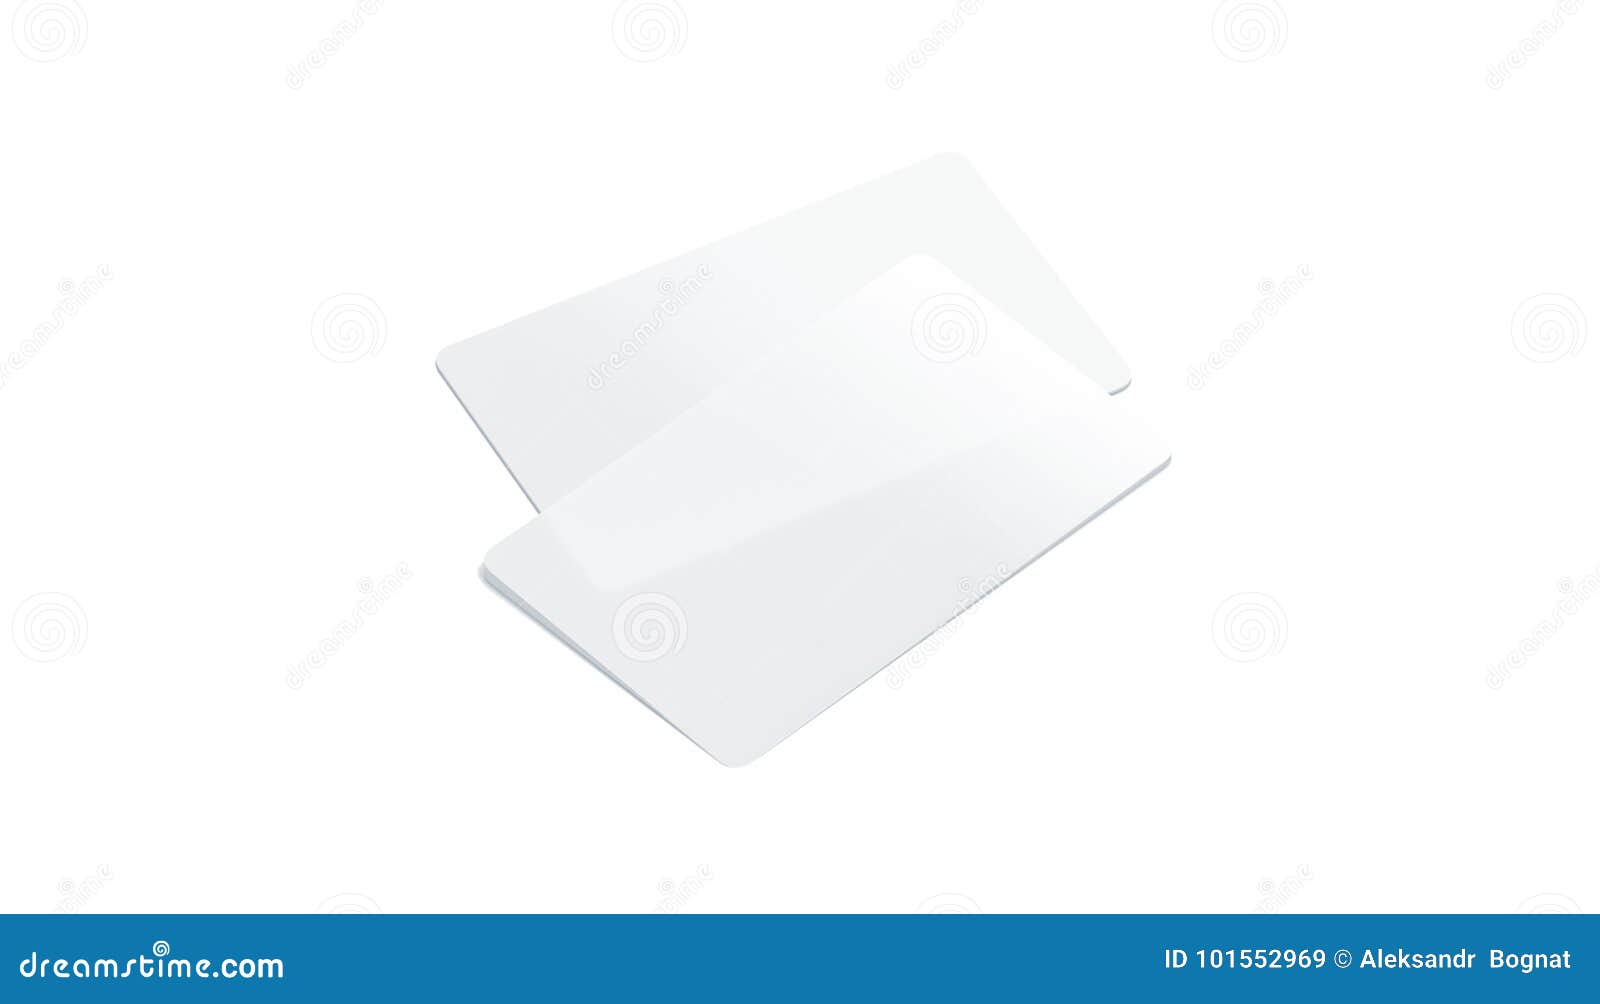 Blank Plastic Transparent Business Cards Mockup Stock Image Intended For Transparent Business Cards Template